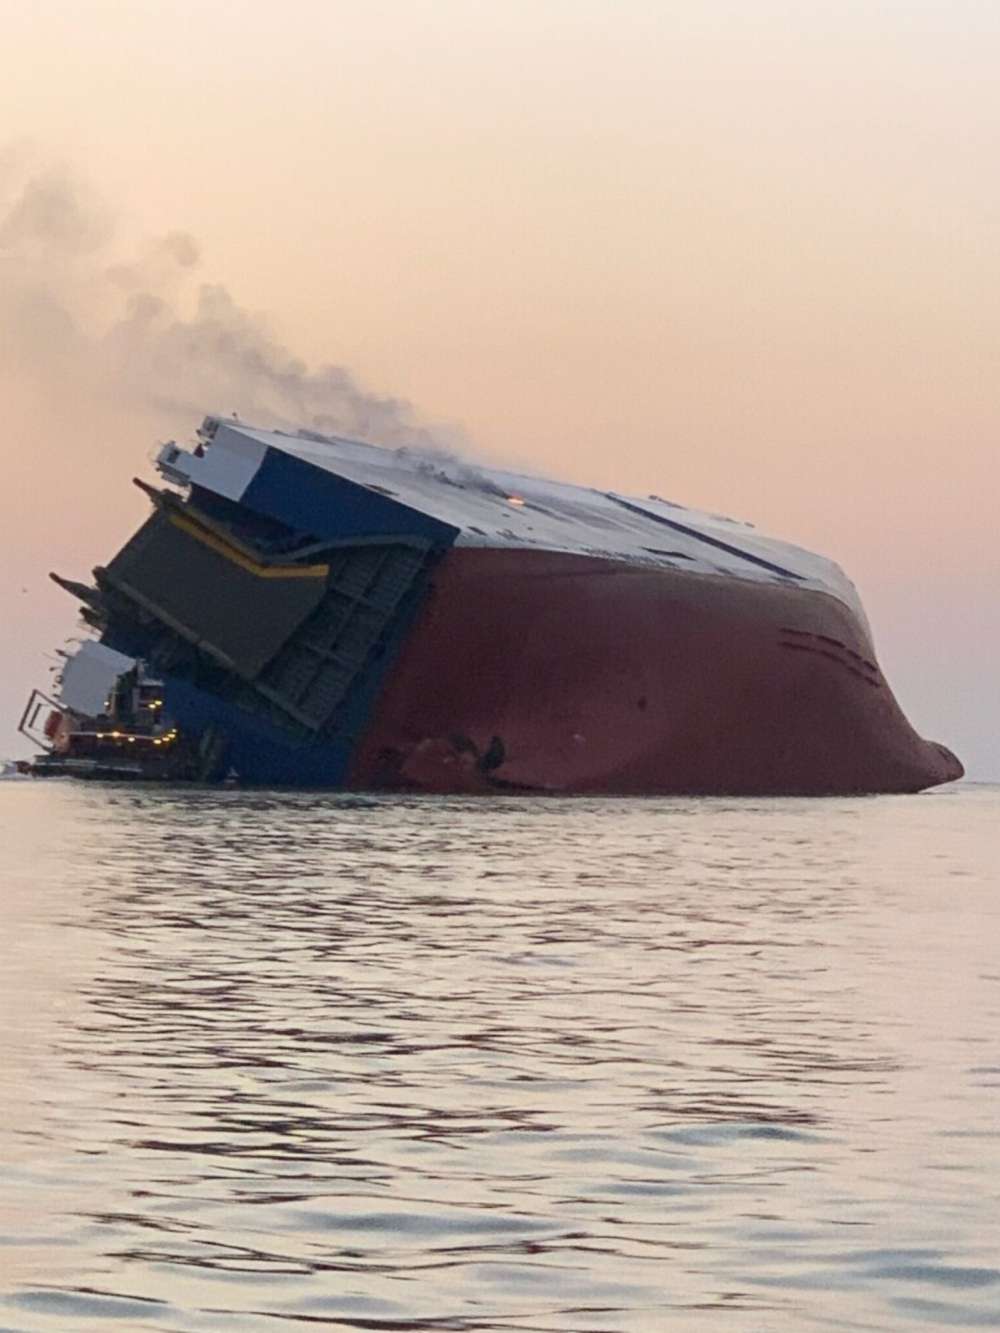 PHOTO: A cargo ship caught fire and overturned in the St. Simons Sound off Brunswick, Ga, Sept. 8, 2019.